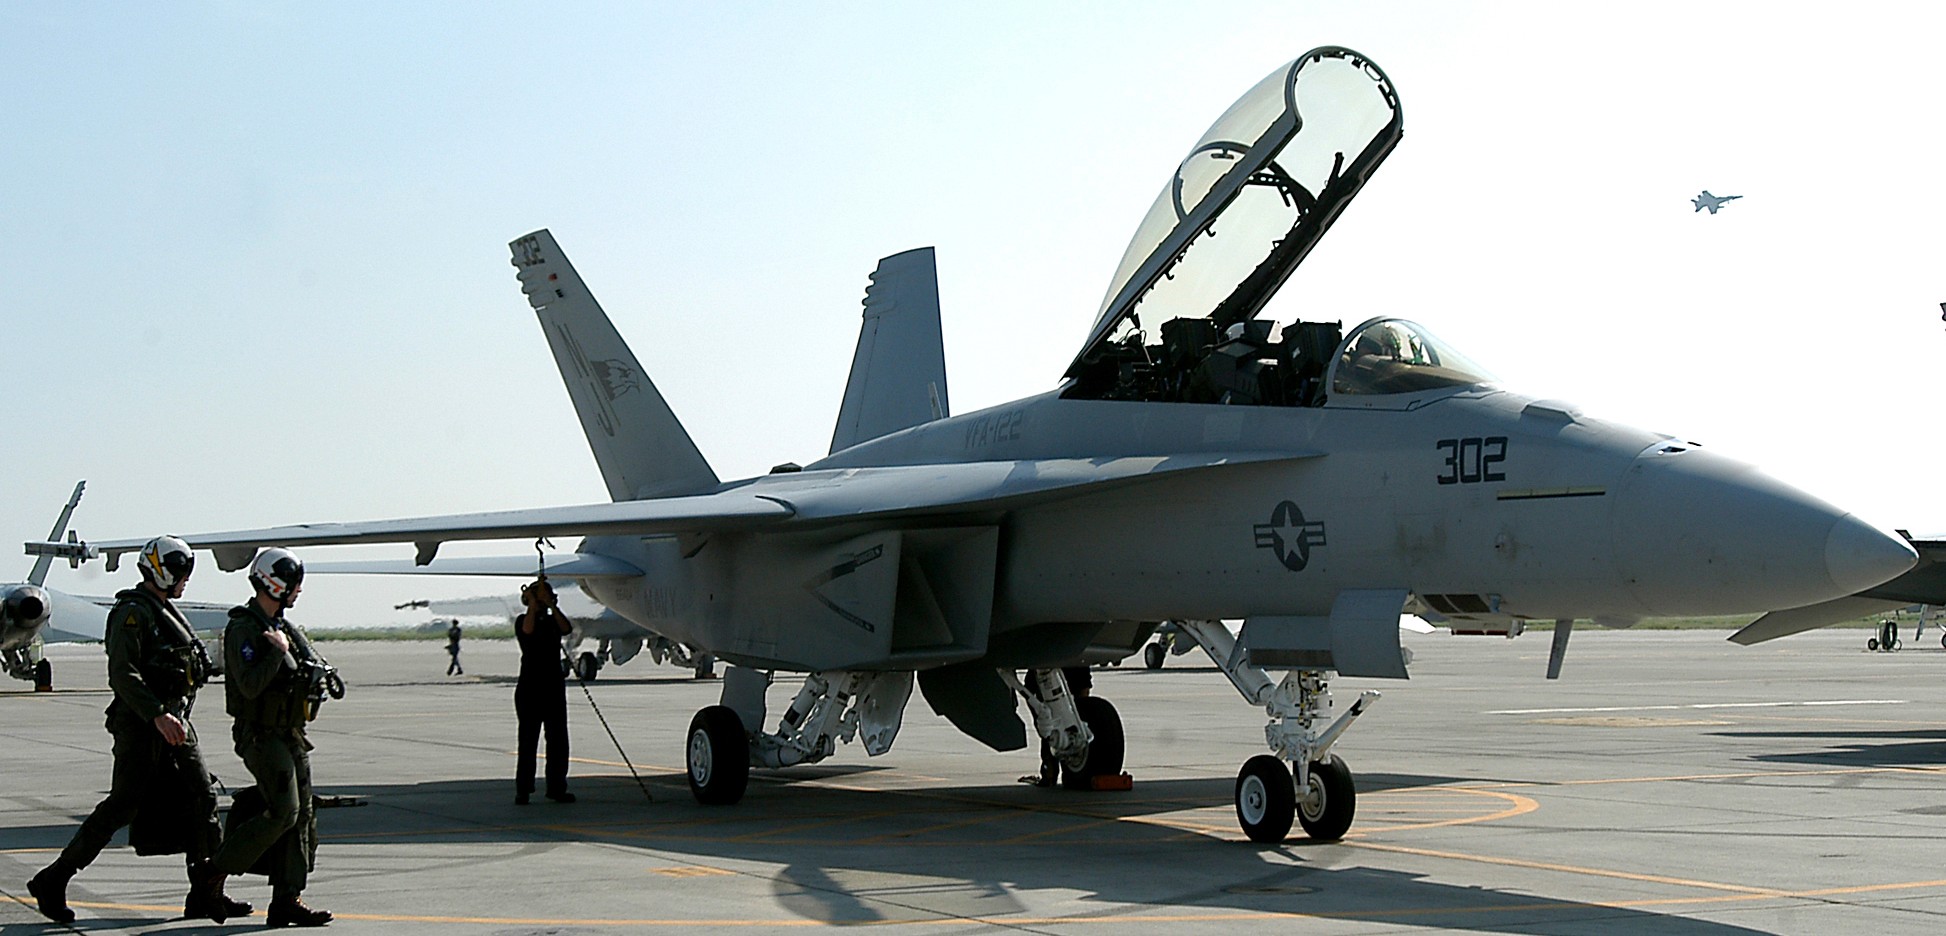 vfa-122 flying eagles strike fighter squadron f/a-18f super hornet 2005 33 nas lemoore california fleet replacement